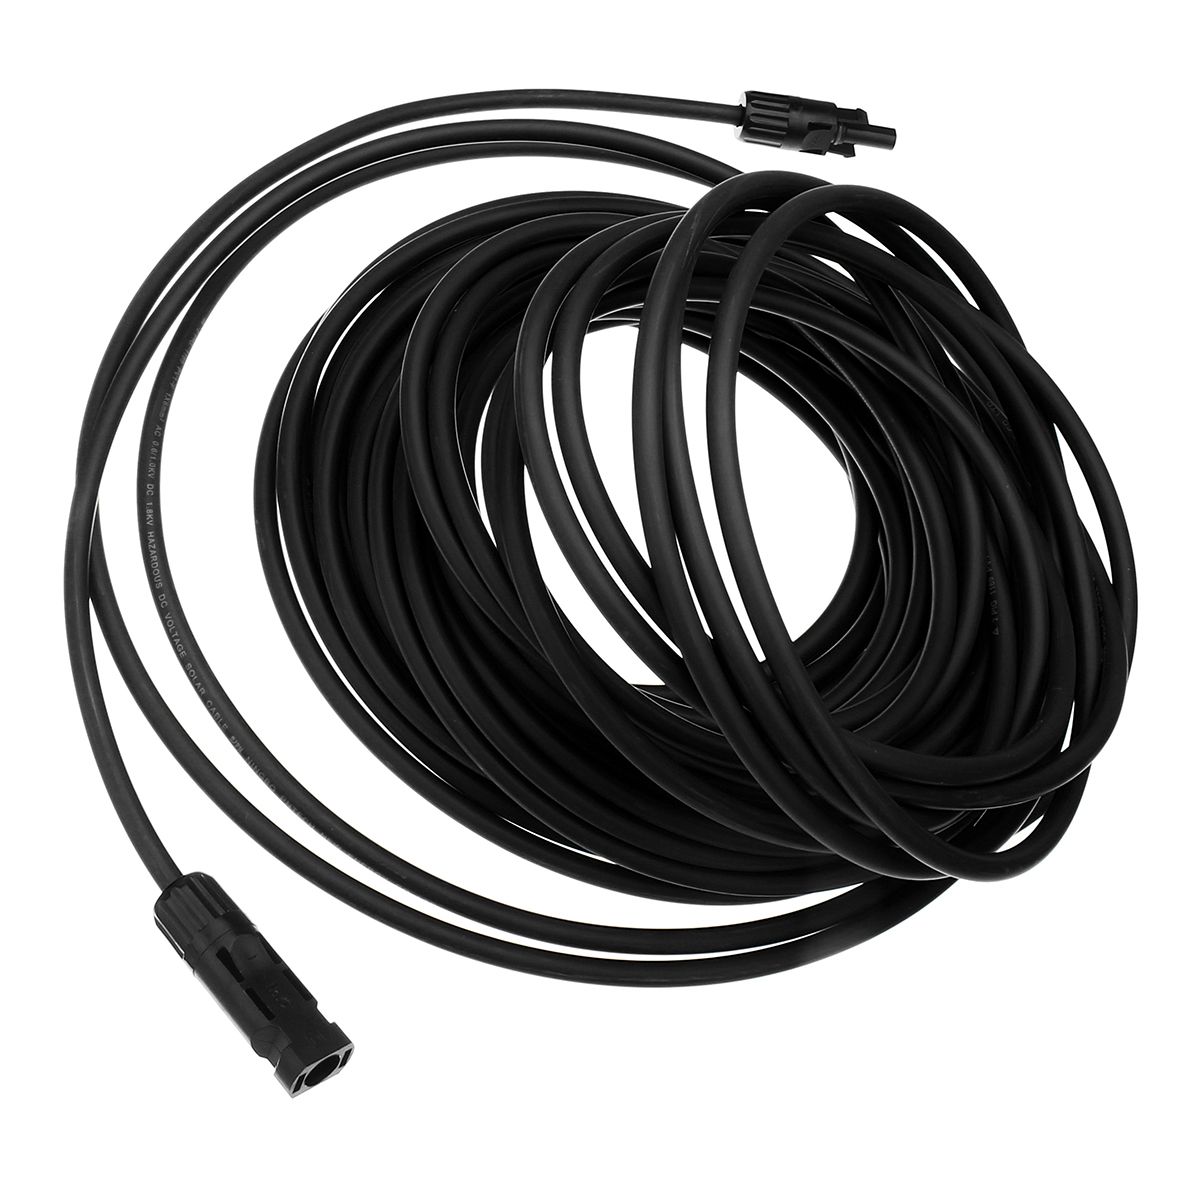 10-AWG-10-Meter-Solar-Panel-Extension-Cable-Wire-BlackRed-with-MC4-Connectors-1338696